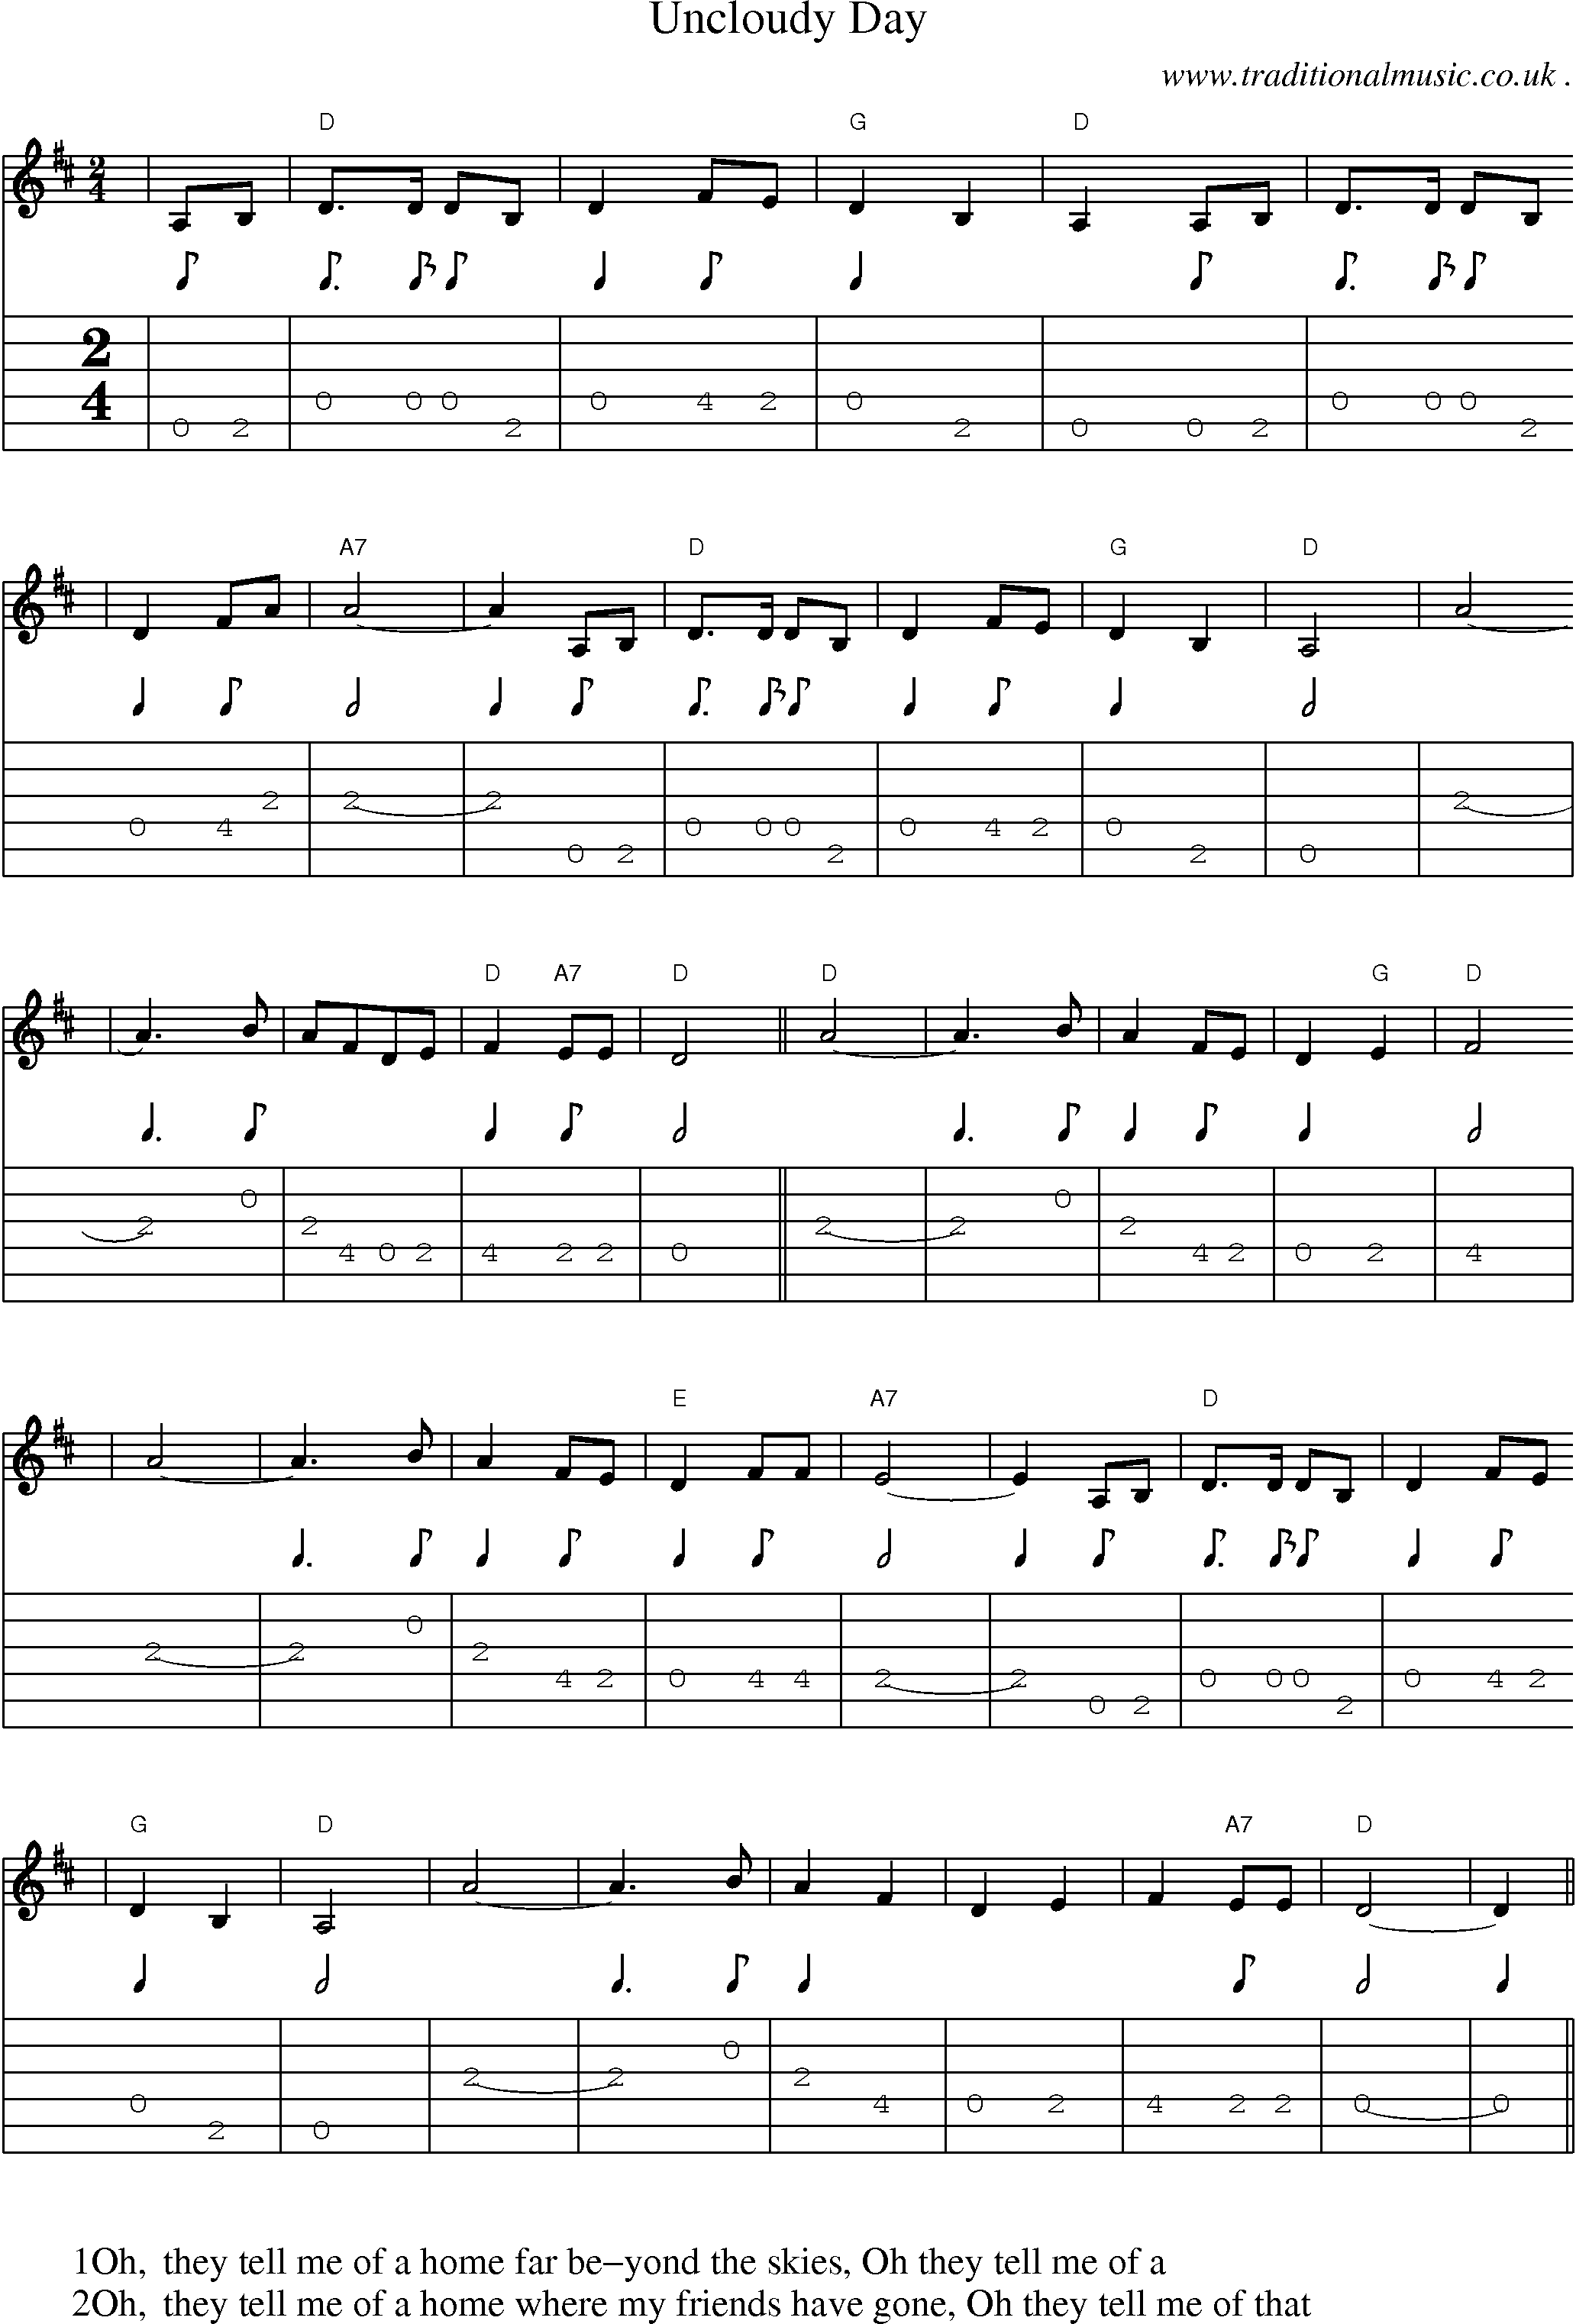 Music Score and Guitar Tabs for Uncloudy Day